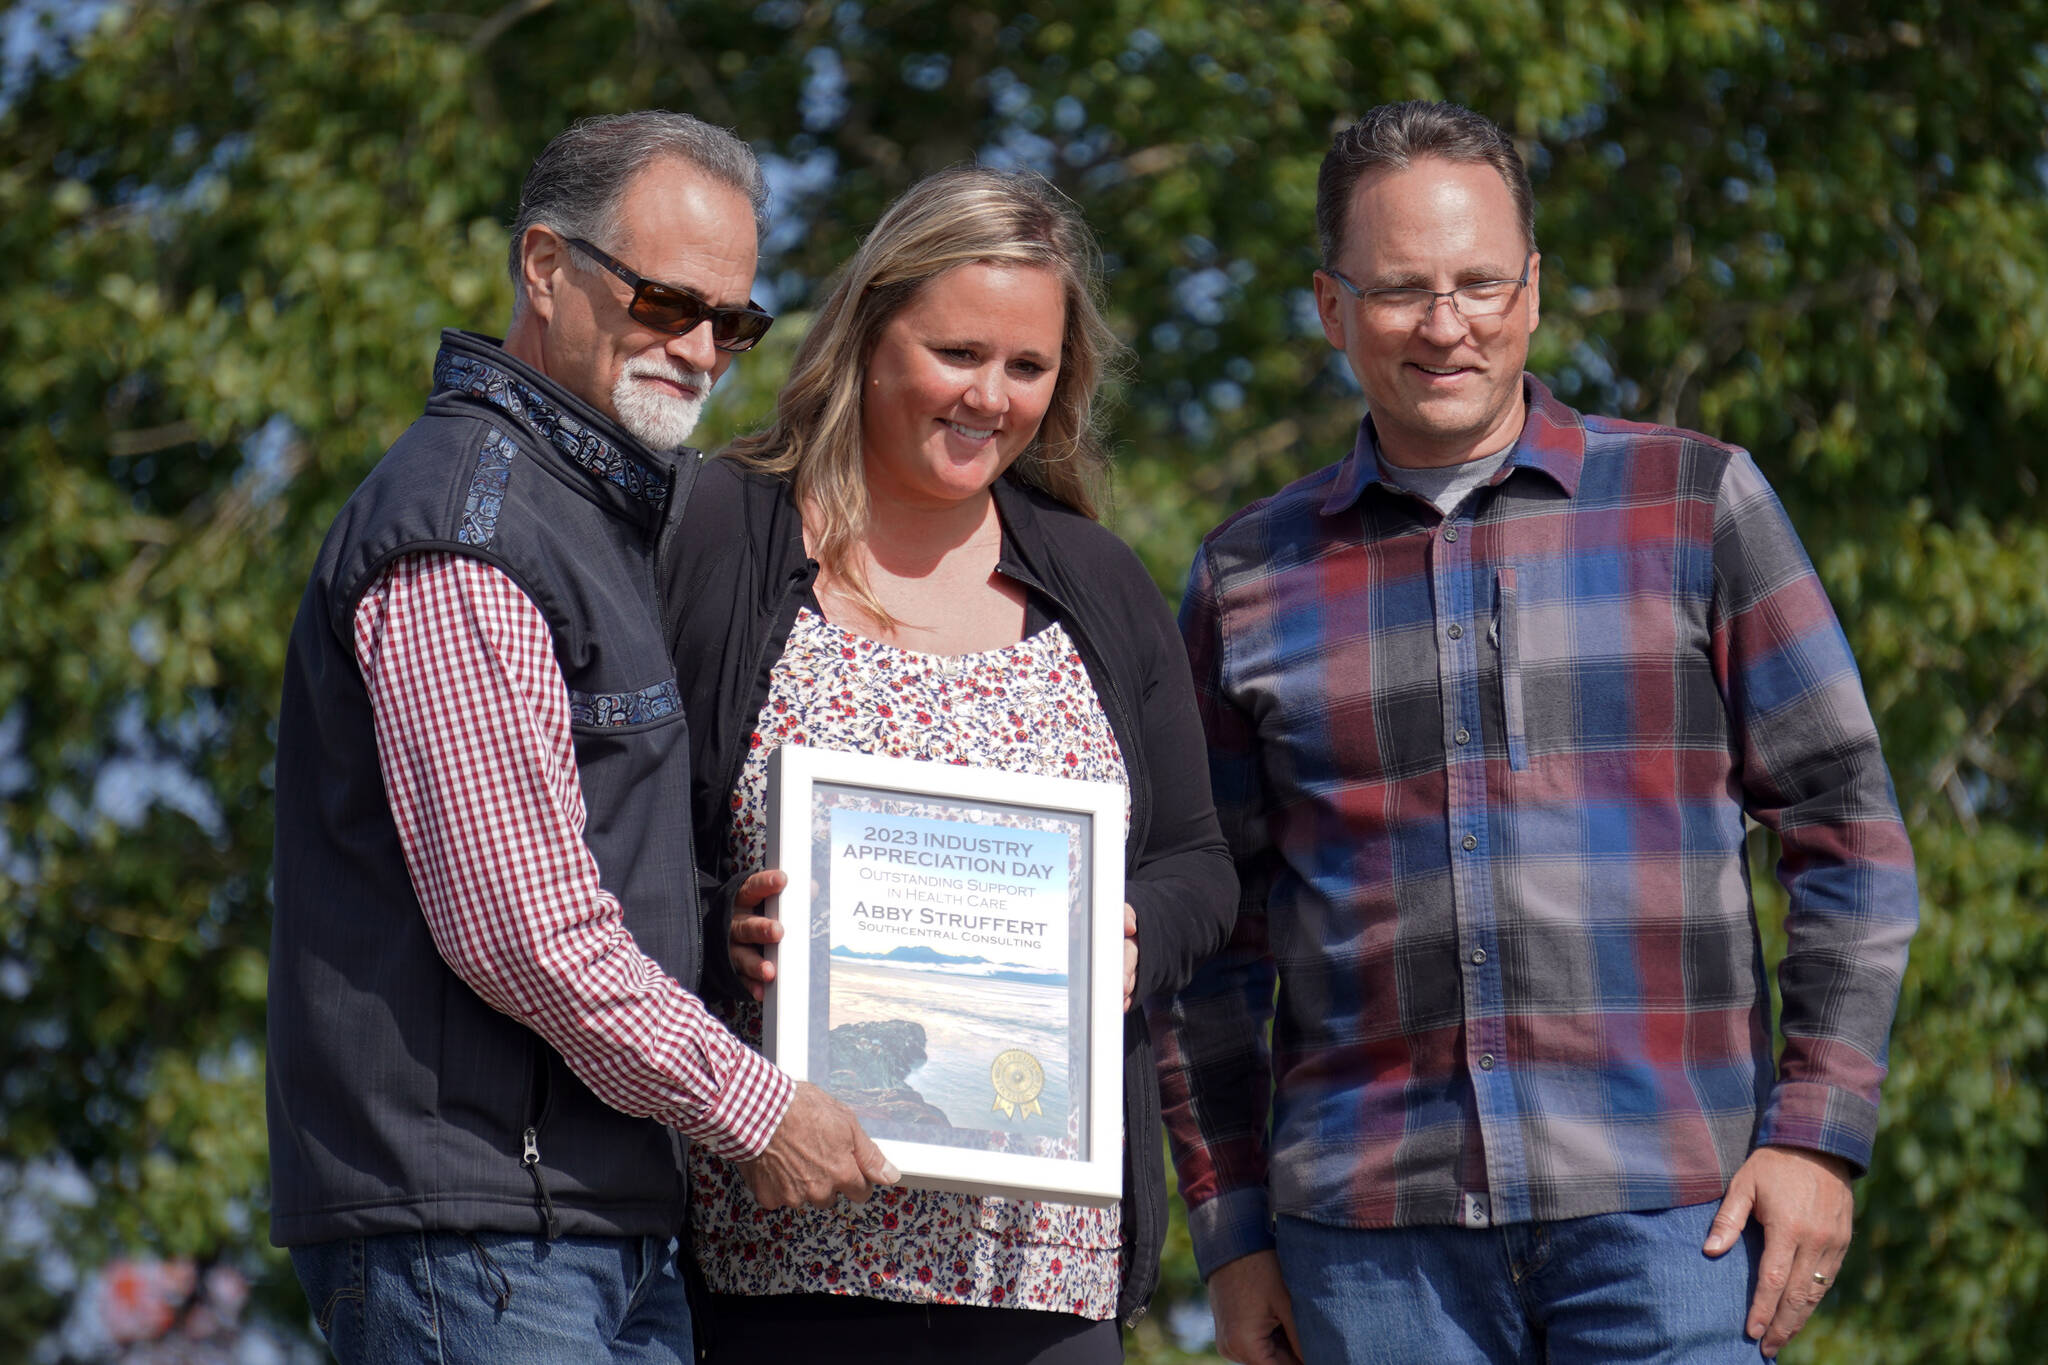 Abby Struffert of Southcentral Consulting, center, receives the Outstanding Support in Health Care Award from Kenai Peninsula Borough Mayor Peter Micciche and Rep. Ben Carpenter, R-Nikiski, during Industry Appreciation Day festivities at the Kenai softball greenstrip on Saturday, Aug. 19, 2023. (Jake Dye/Peninsula Clarion)